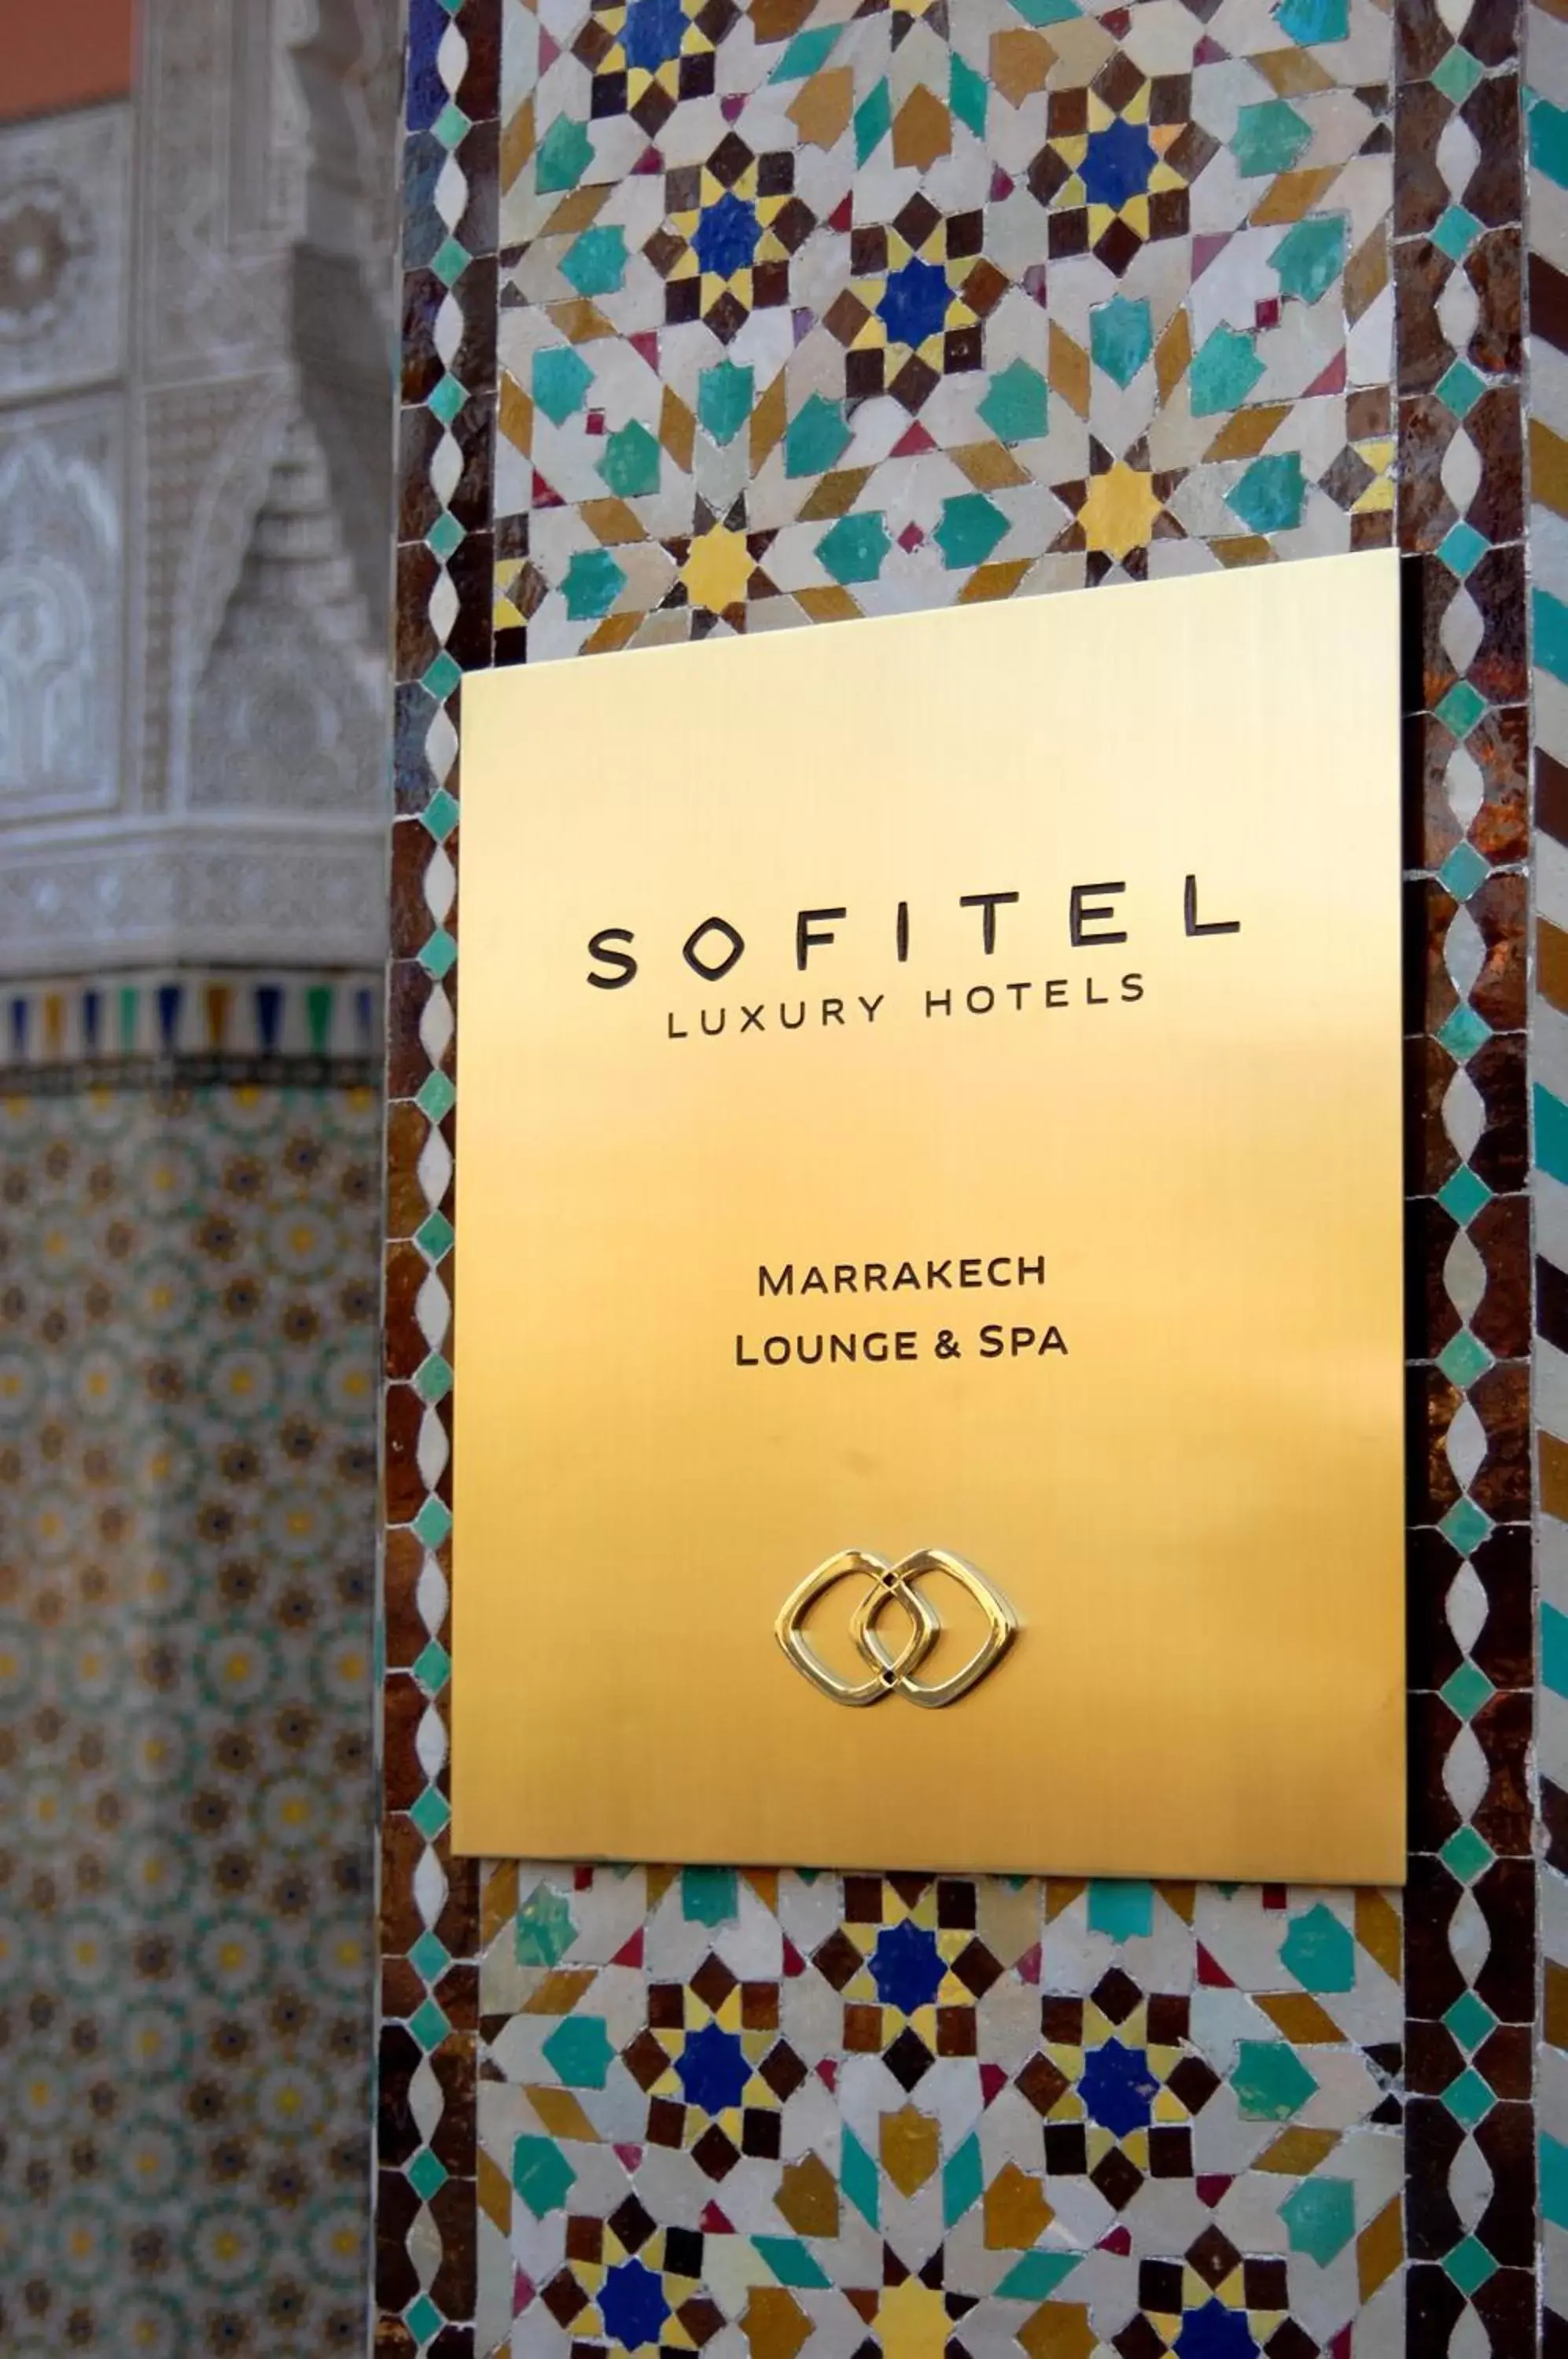 Decorative detail in Sofitel Marrakech Lounge and Spa